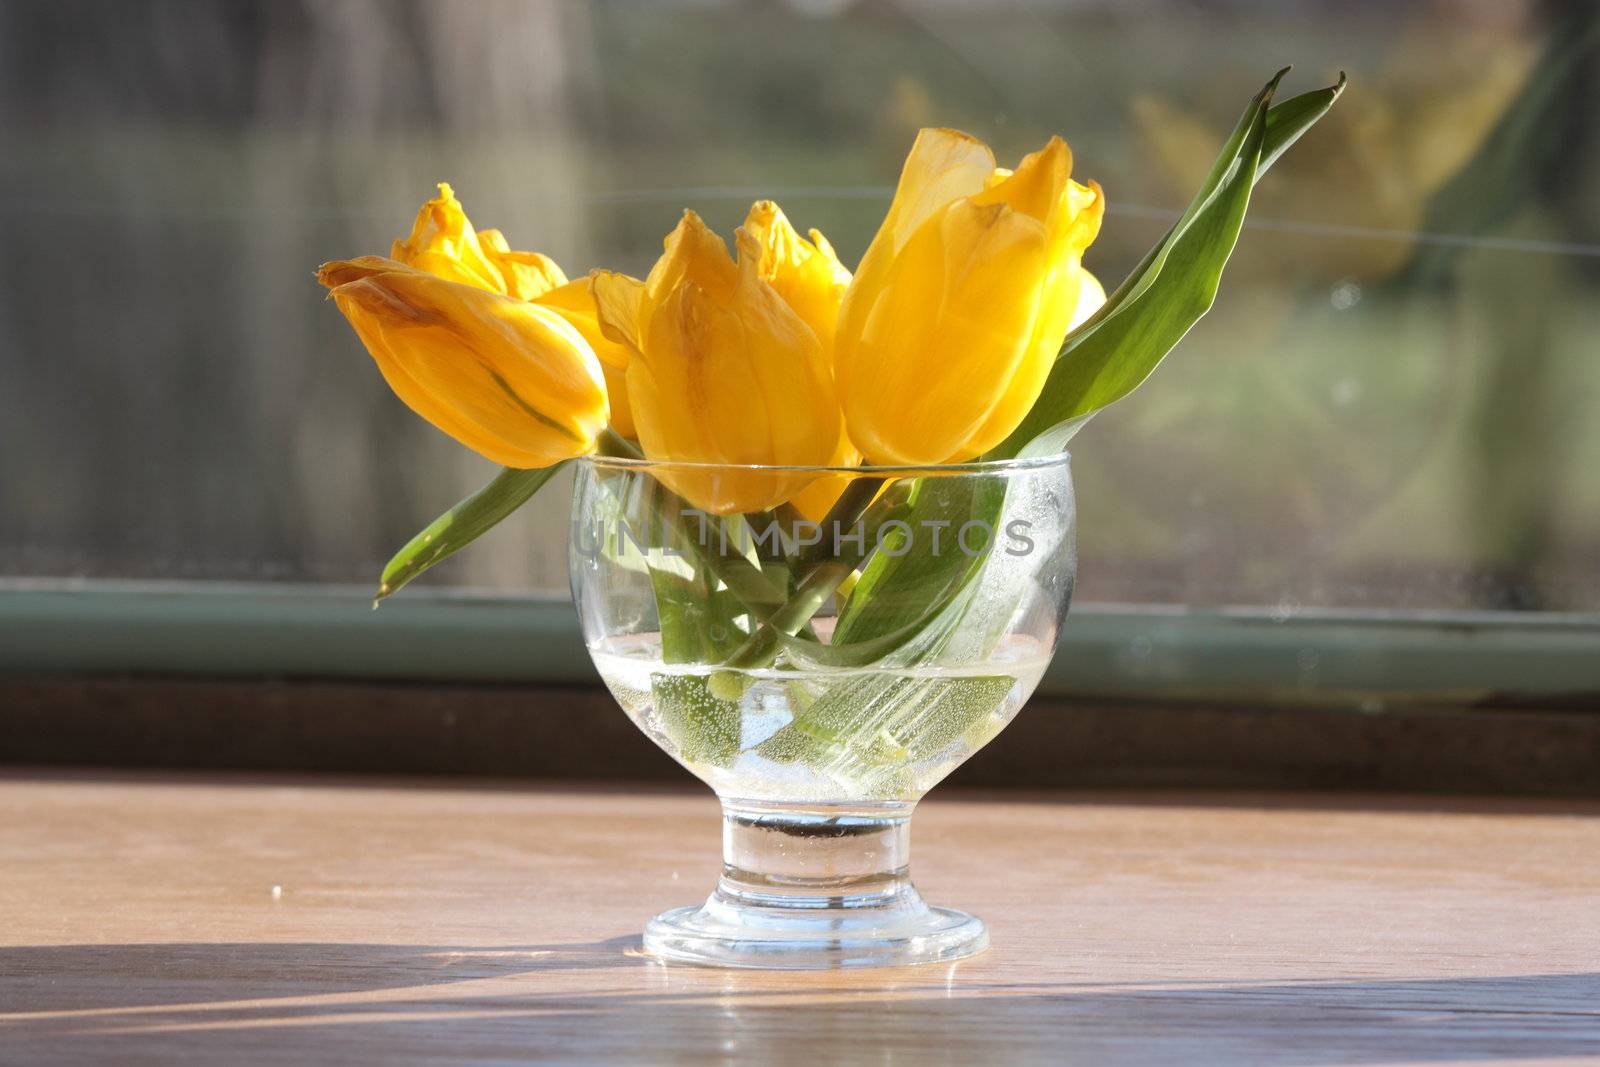 Bouquet of the fresh tulips in vase of glass, against window.